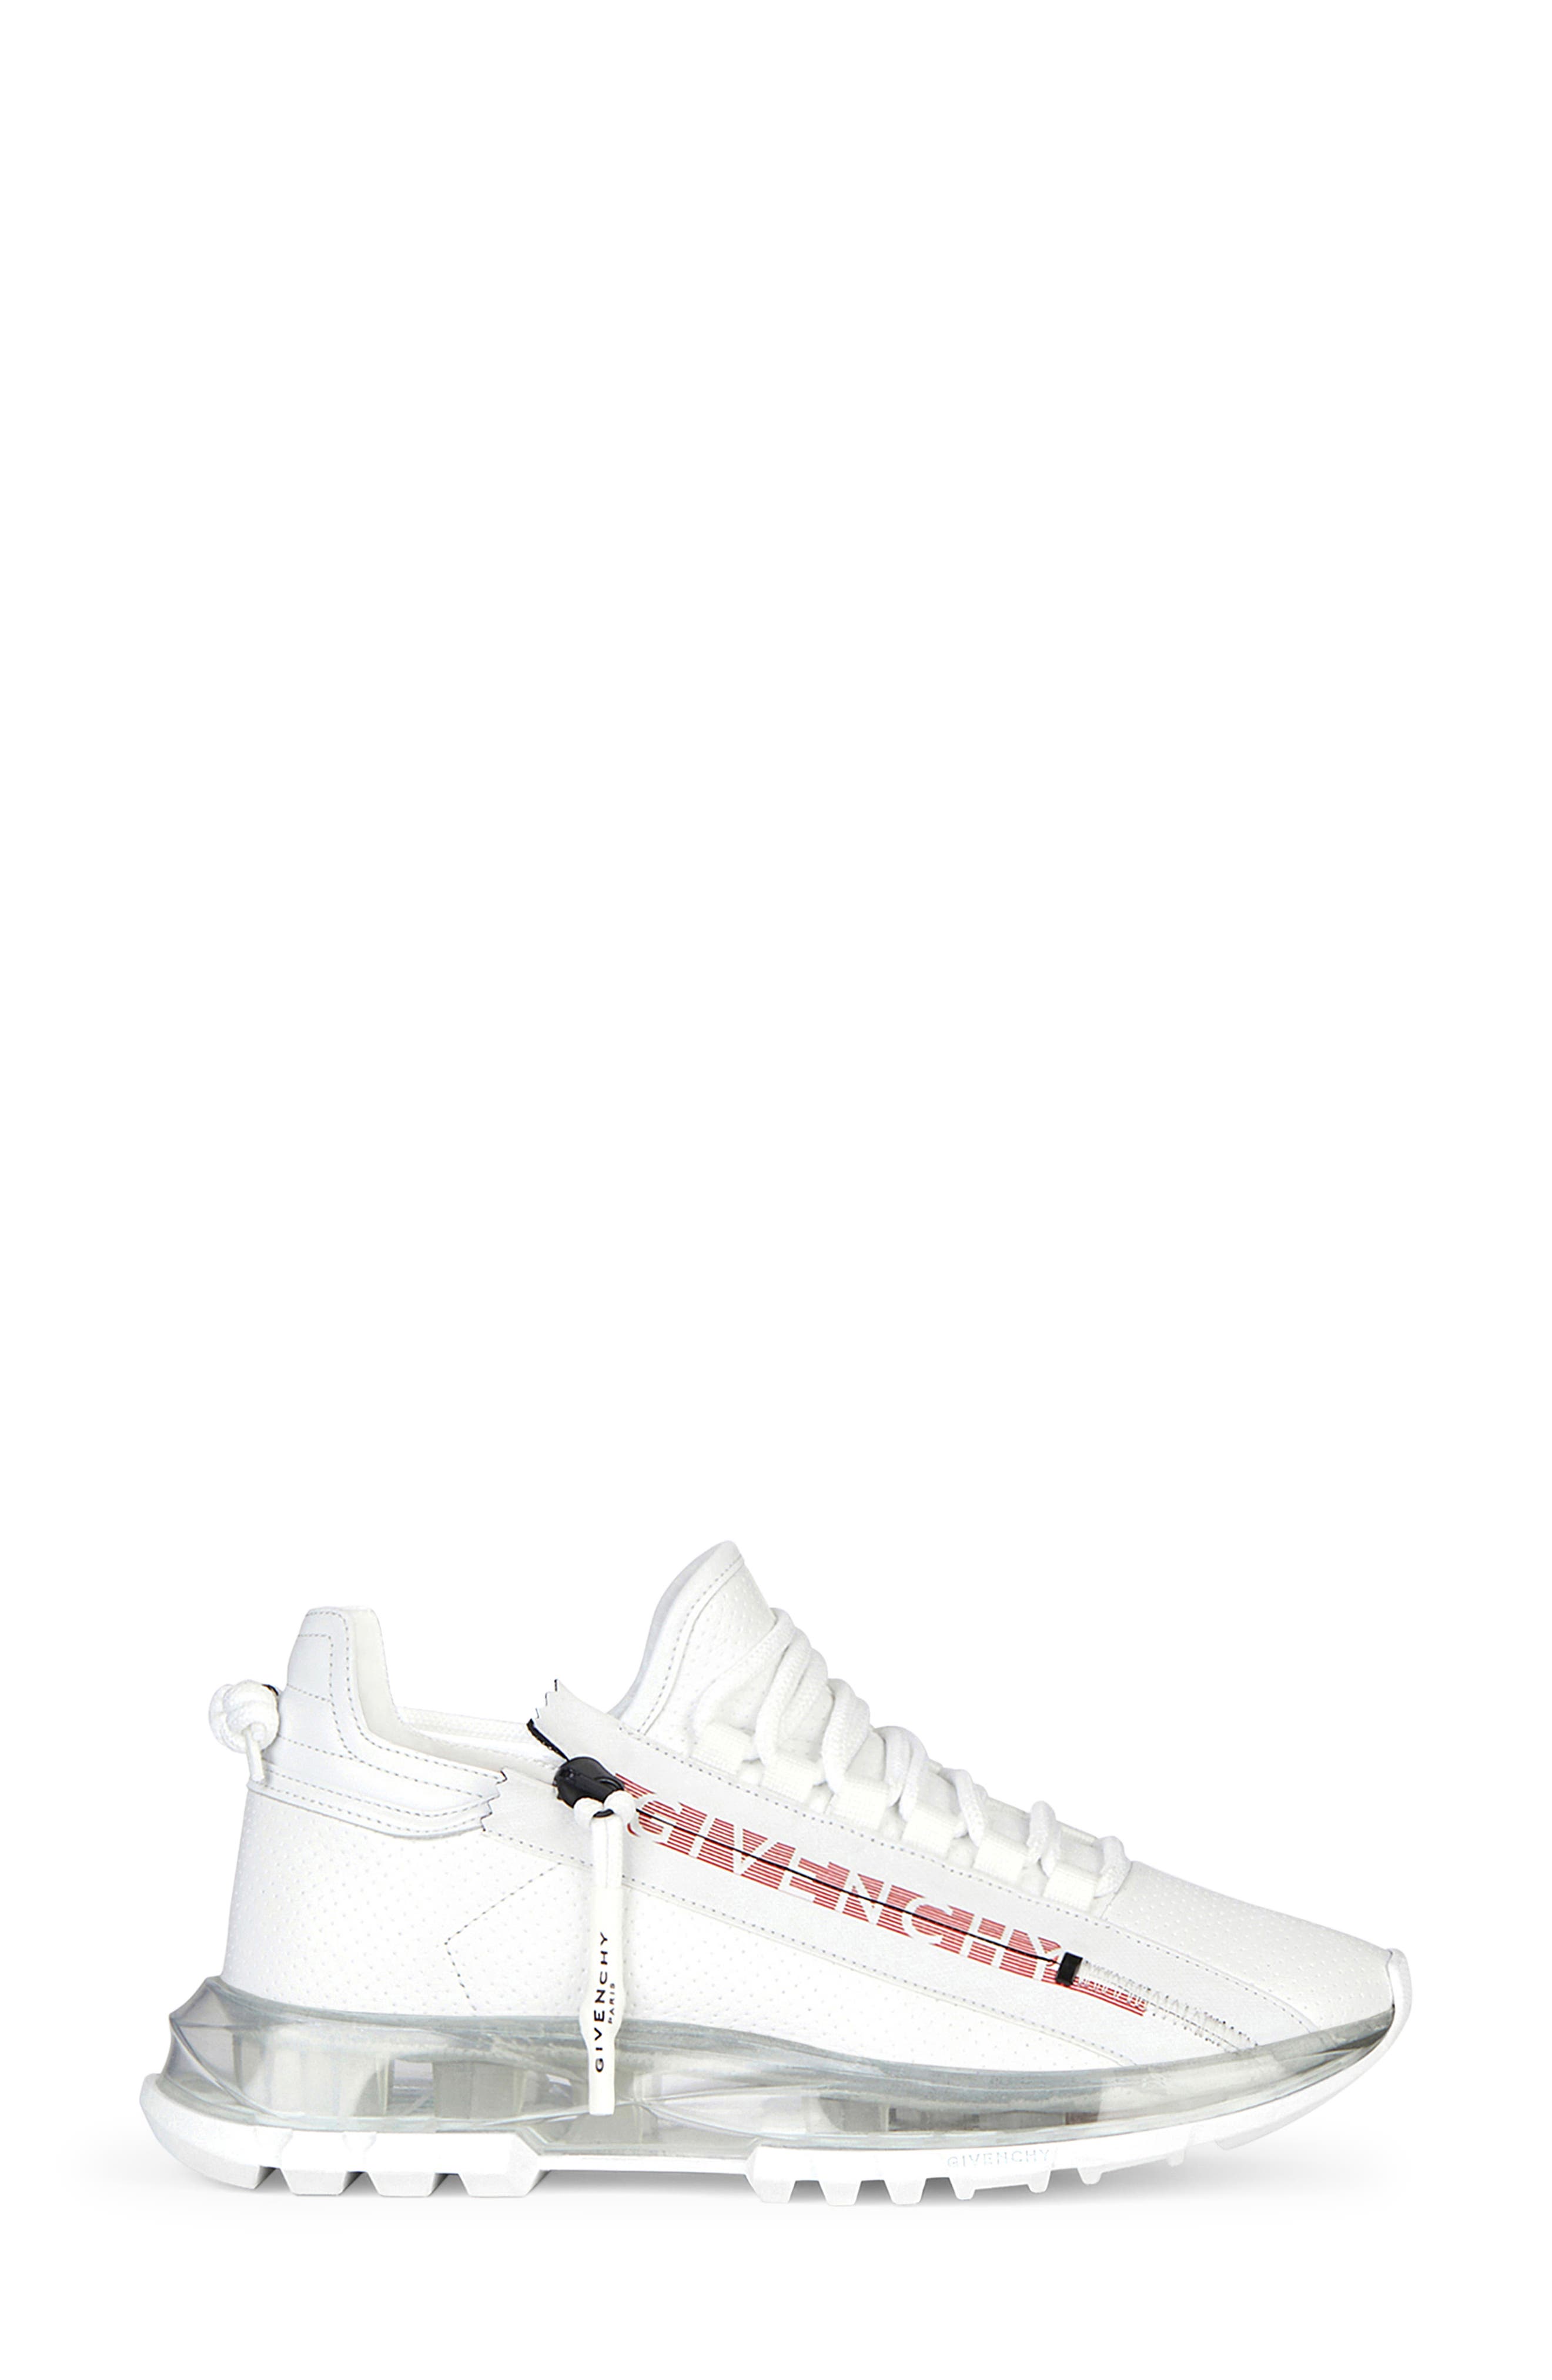 givenchy running shoes